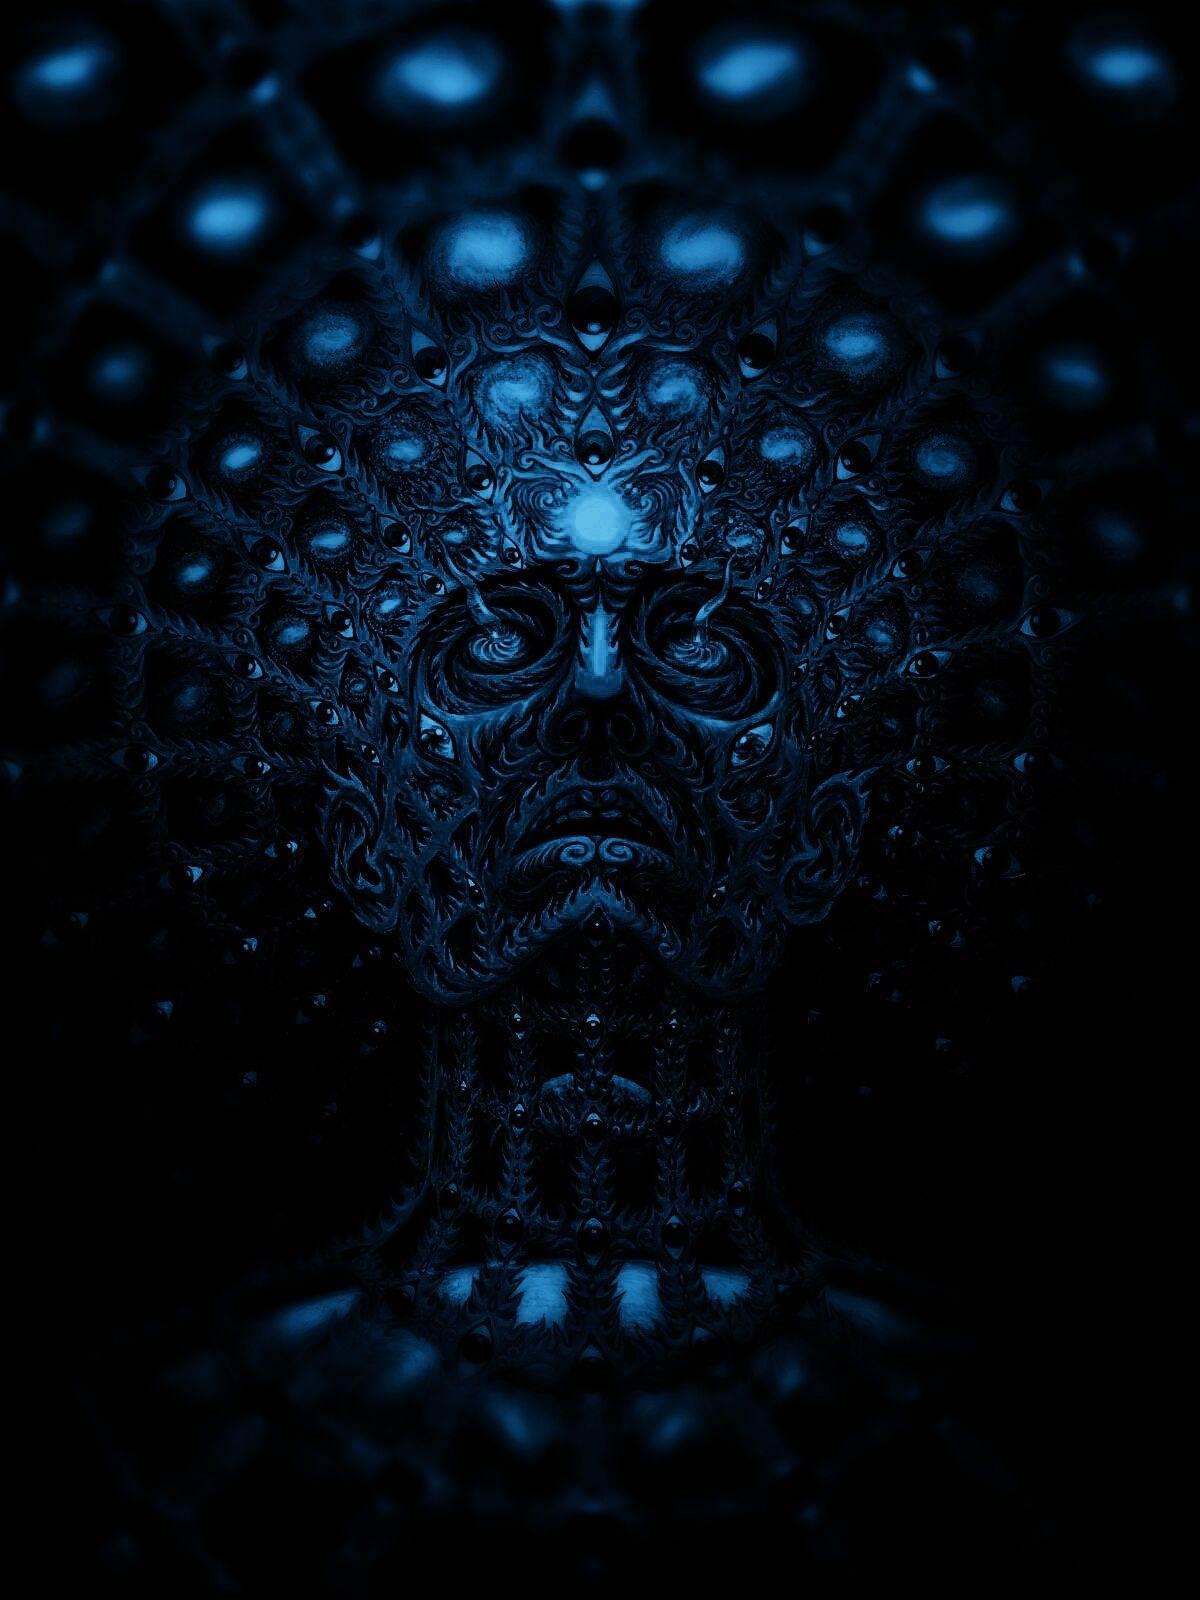 Tool band background\wallpaper for smartphone